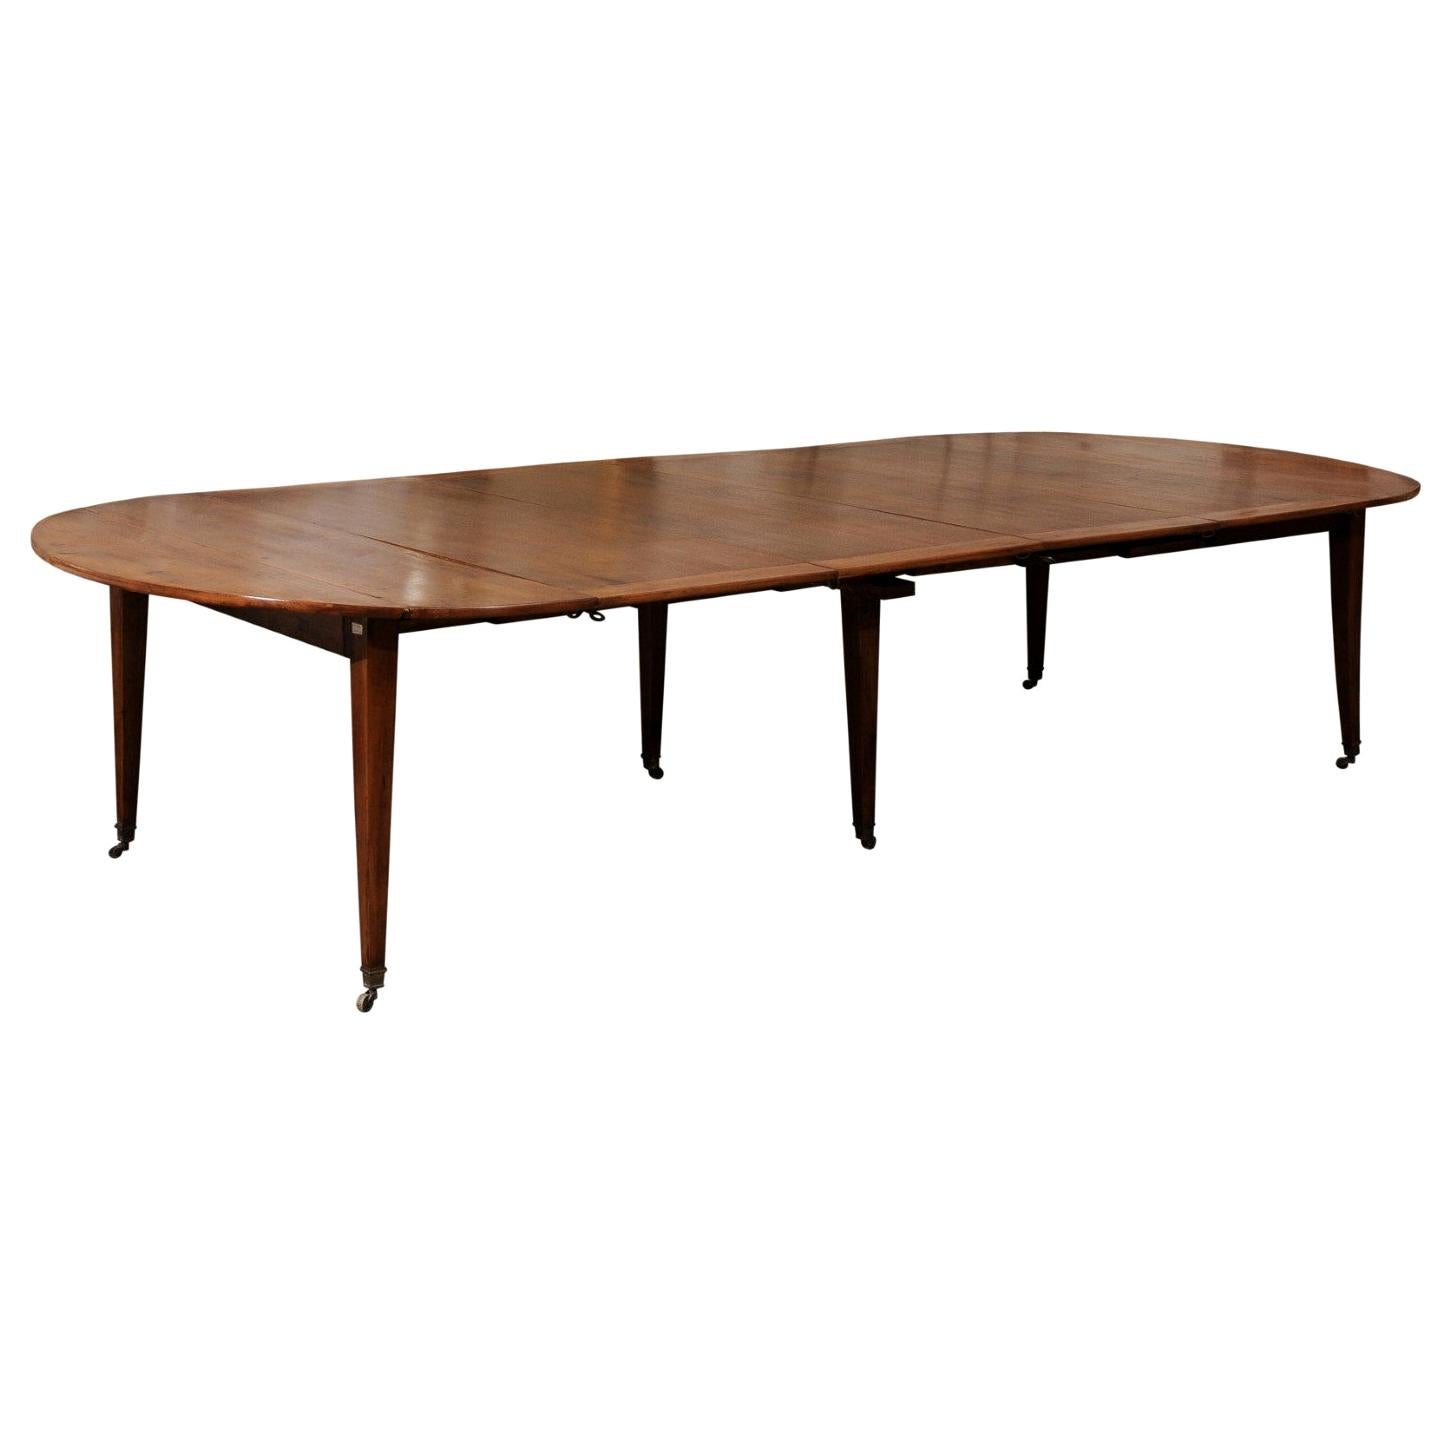 French 1850s Walnut Oval Extension Dining Table with Four Removable Leaves